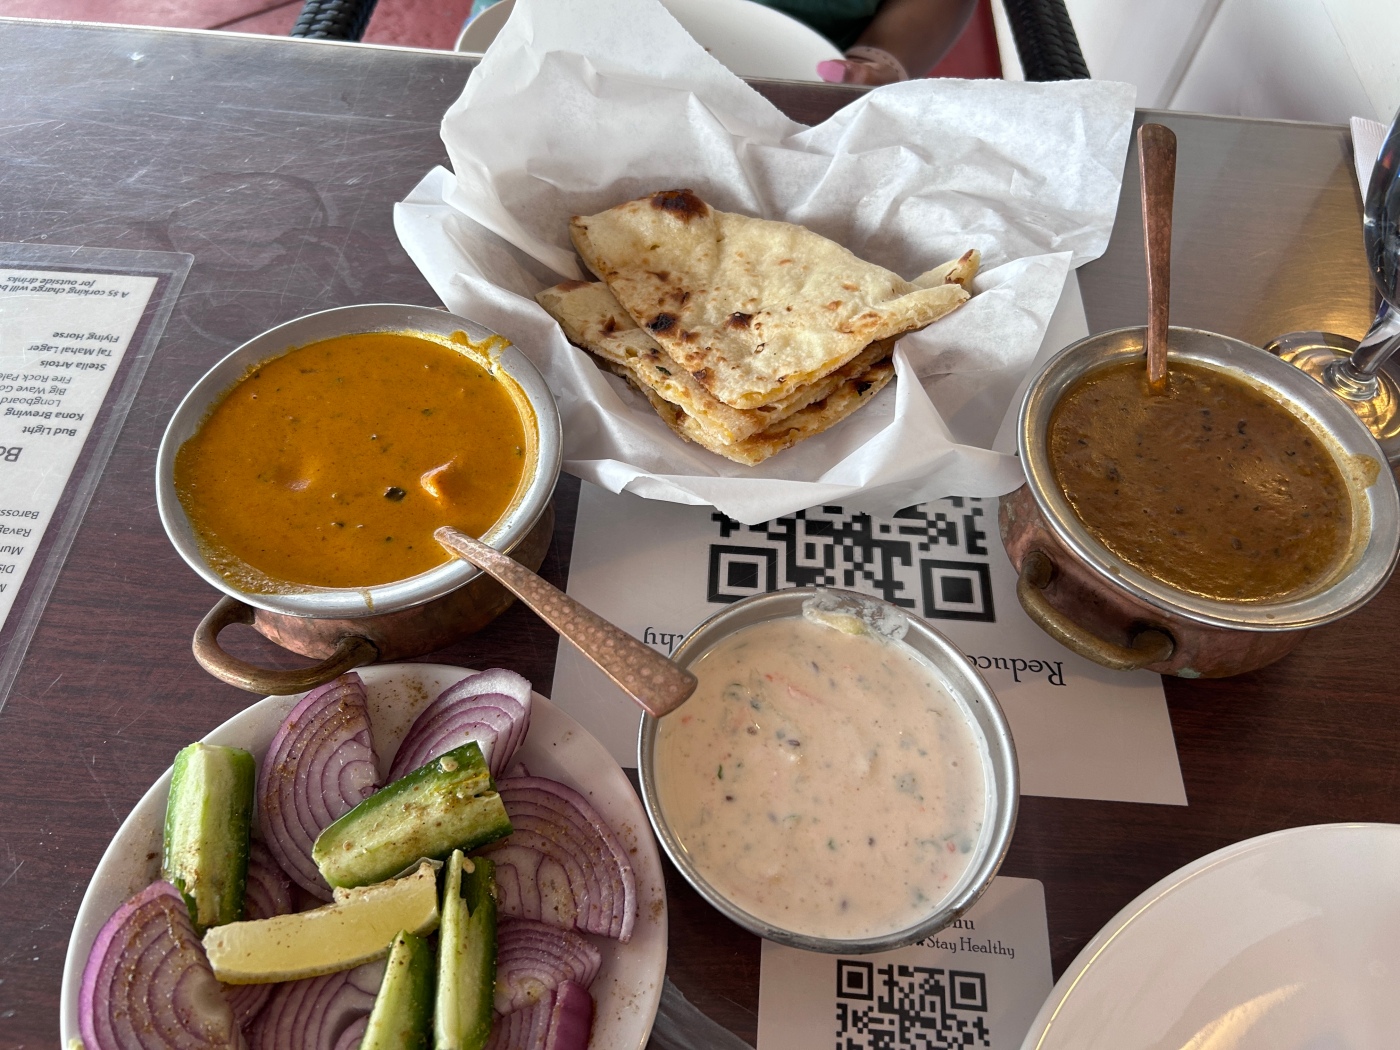 Indian food in Maui: 2 Options, 1’s really good!